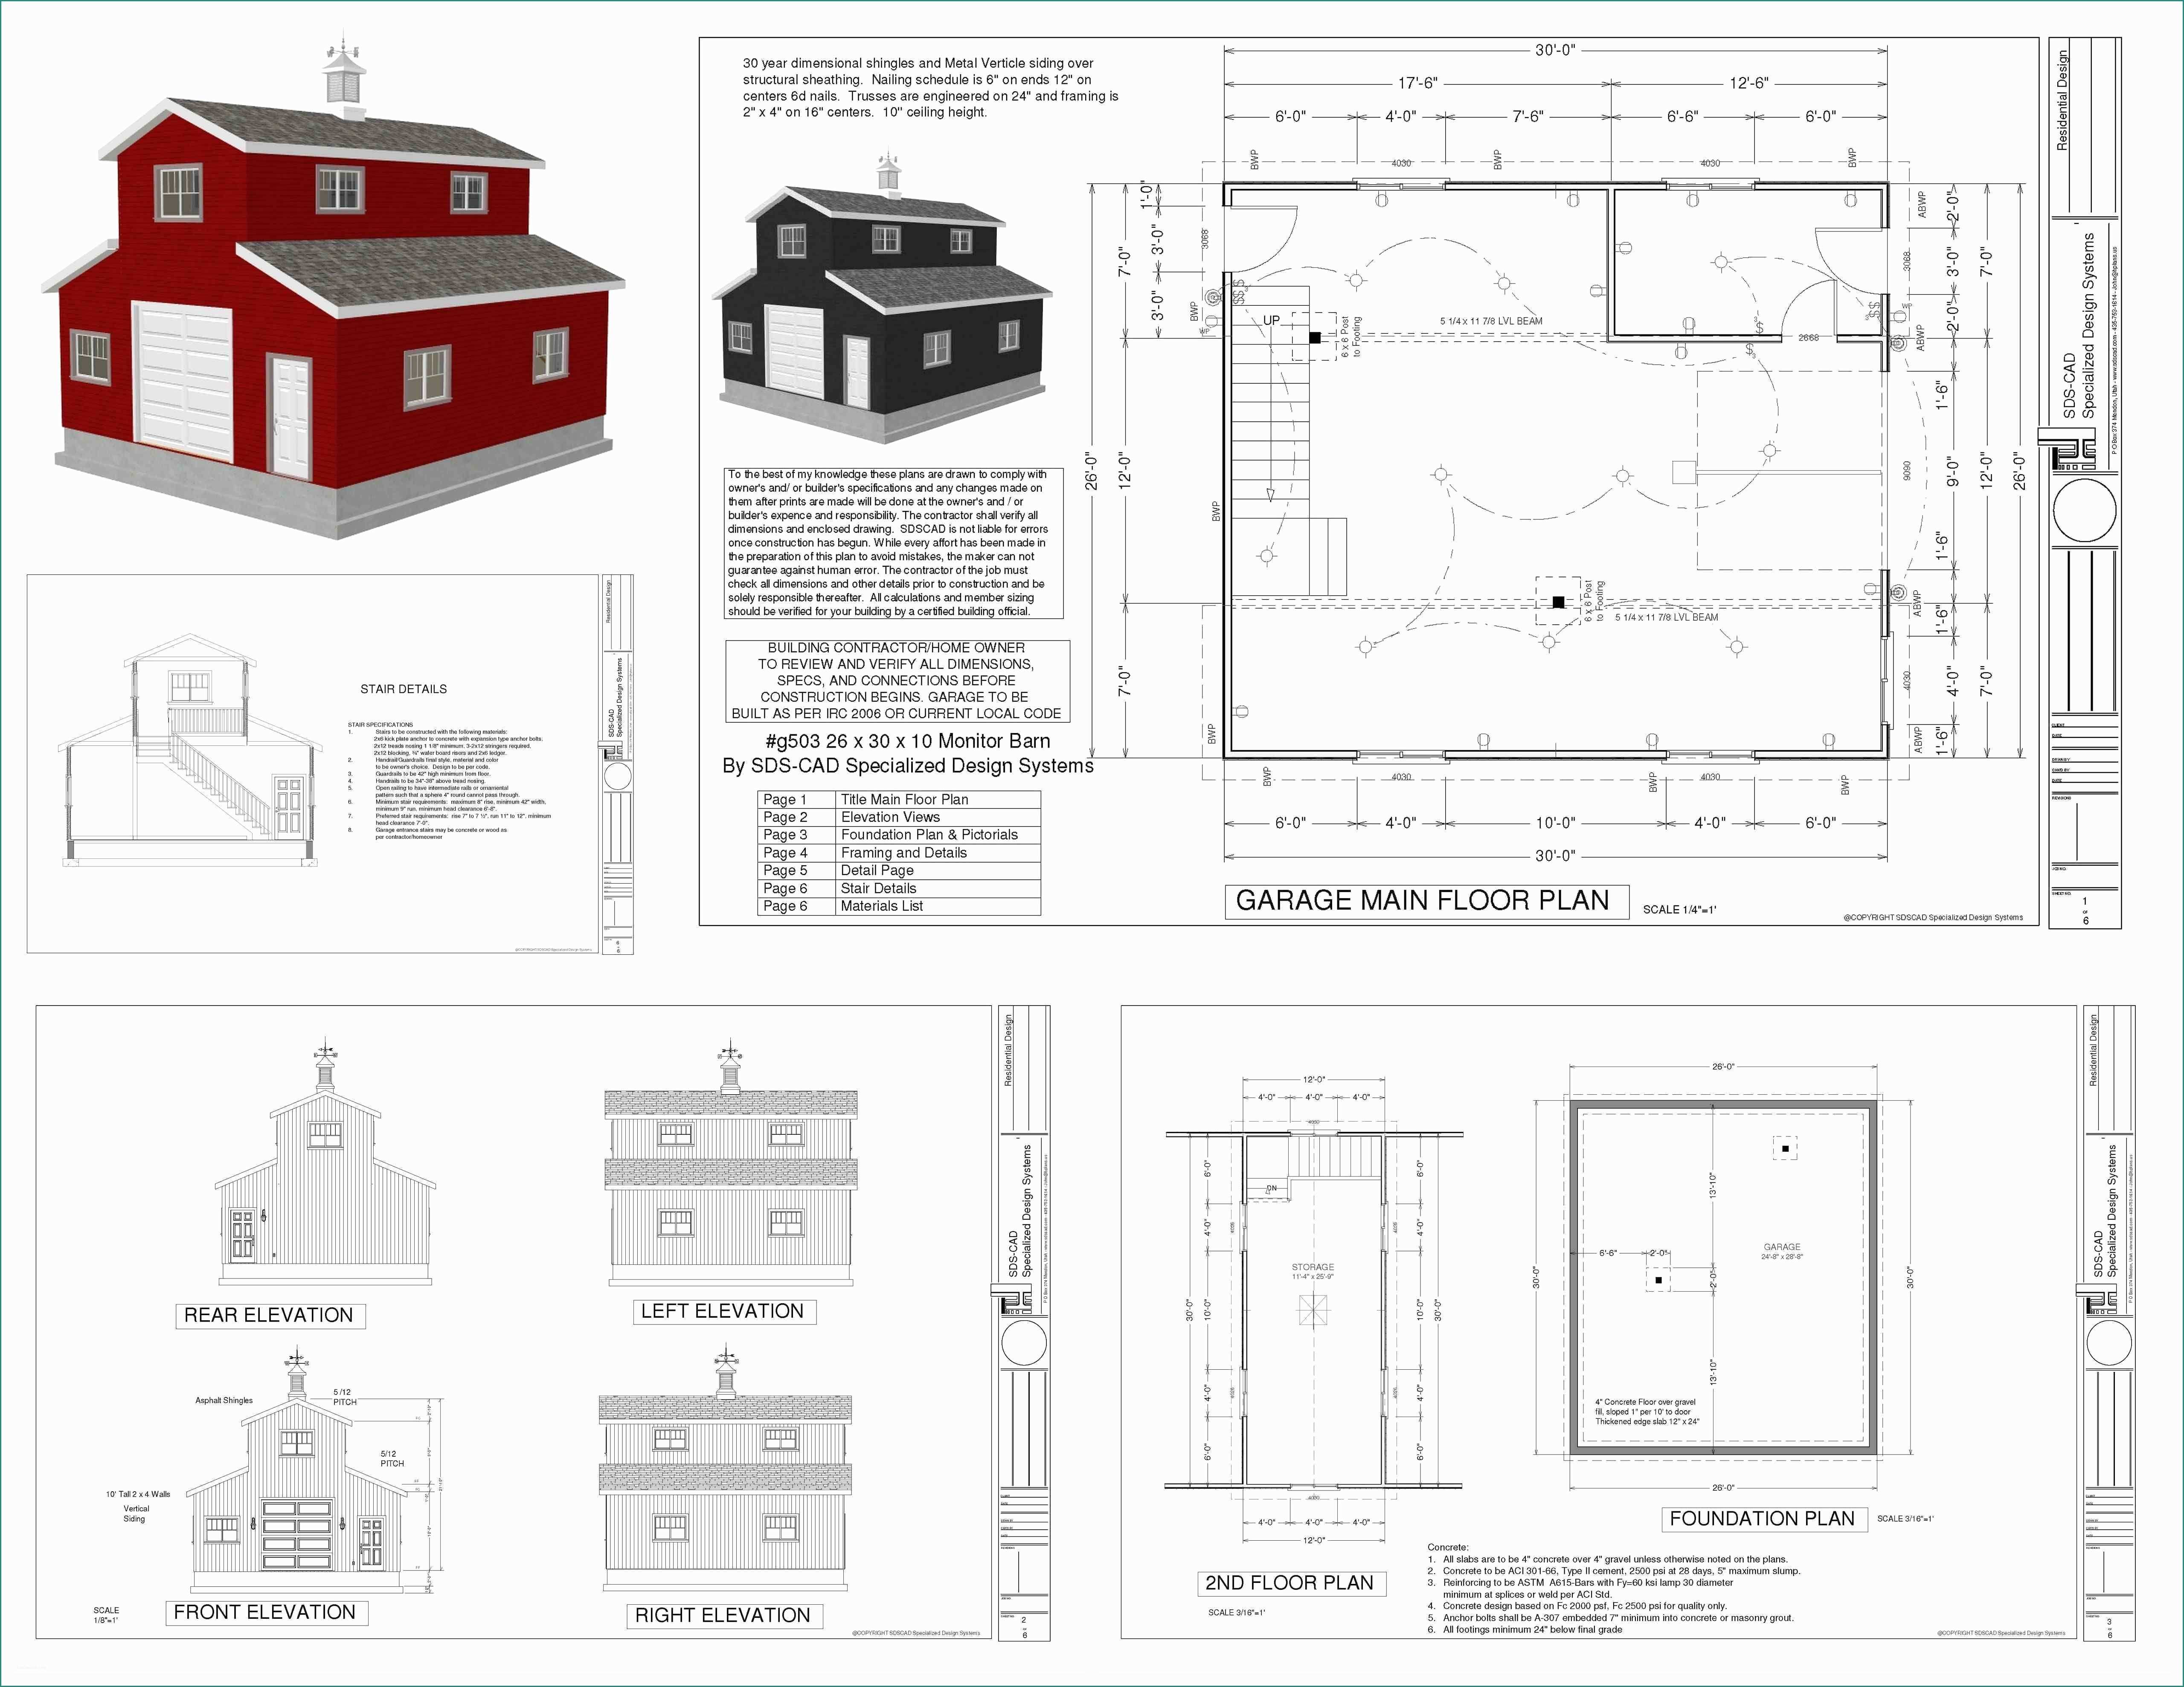 Rampe Disabili Dwg E Floor Plans for Handicap Accessible Homes Luxury House with Wings